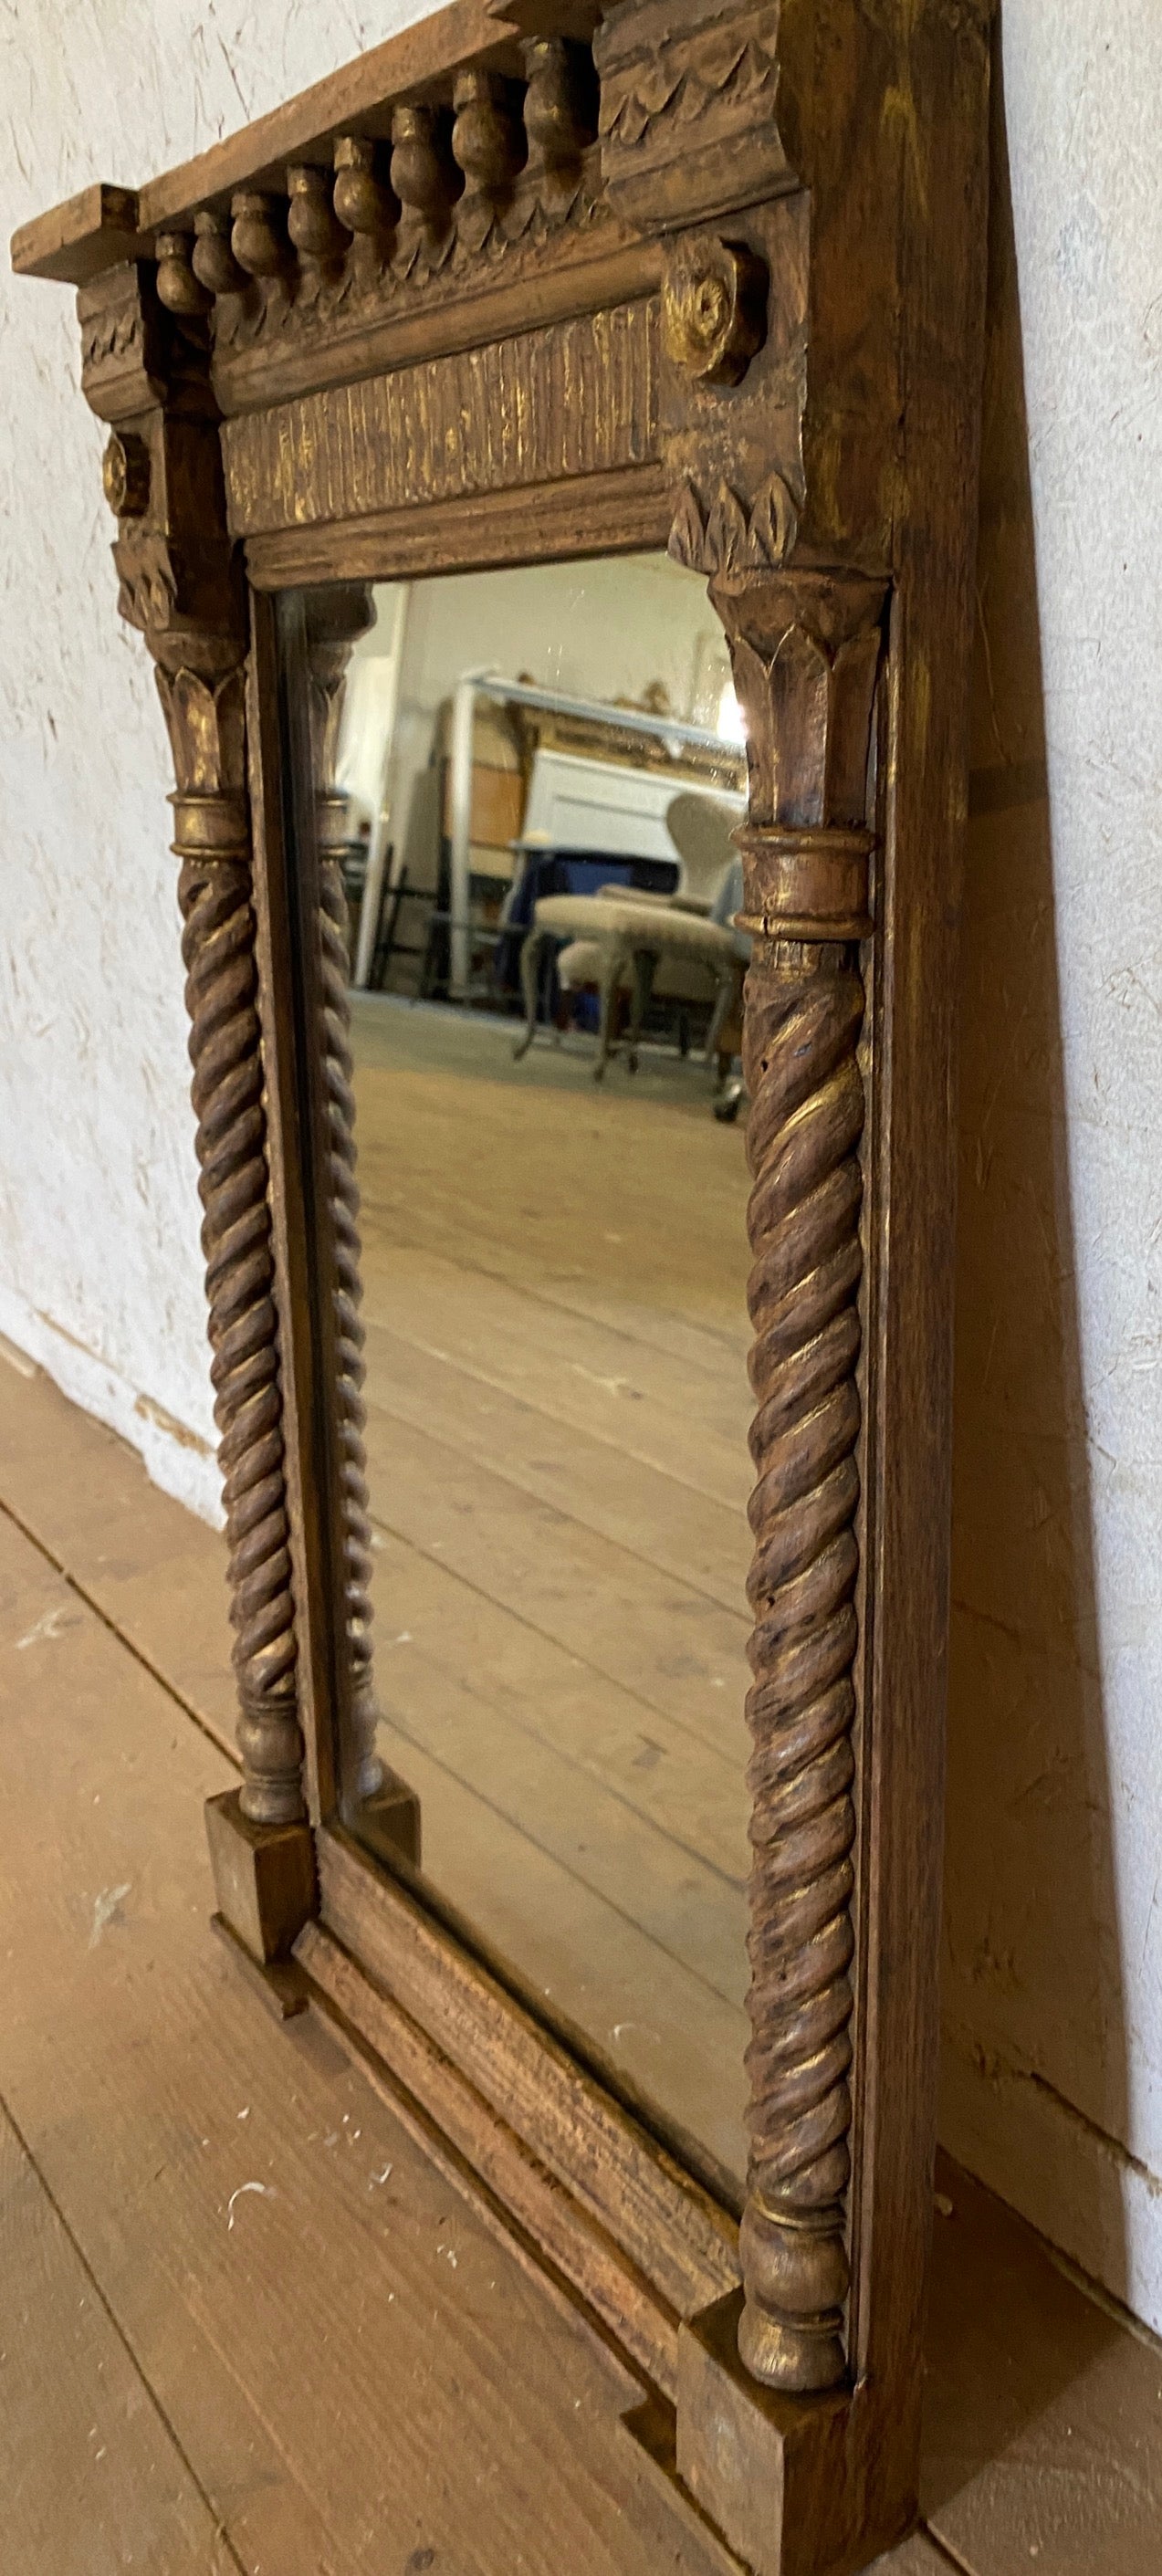 A smaller scale rectangular Italian gilt wood wall mirror in the style of a Renaissance tabernacle is pedimented with turned classical columns as supports. The original gilding, the old plate mirror, with some losses and the wonderful aged patina